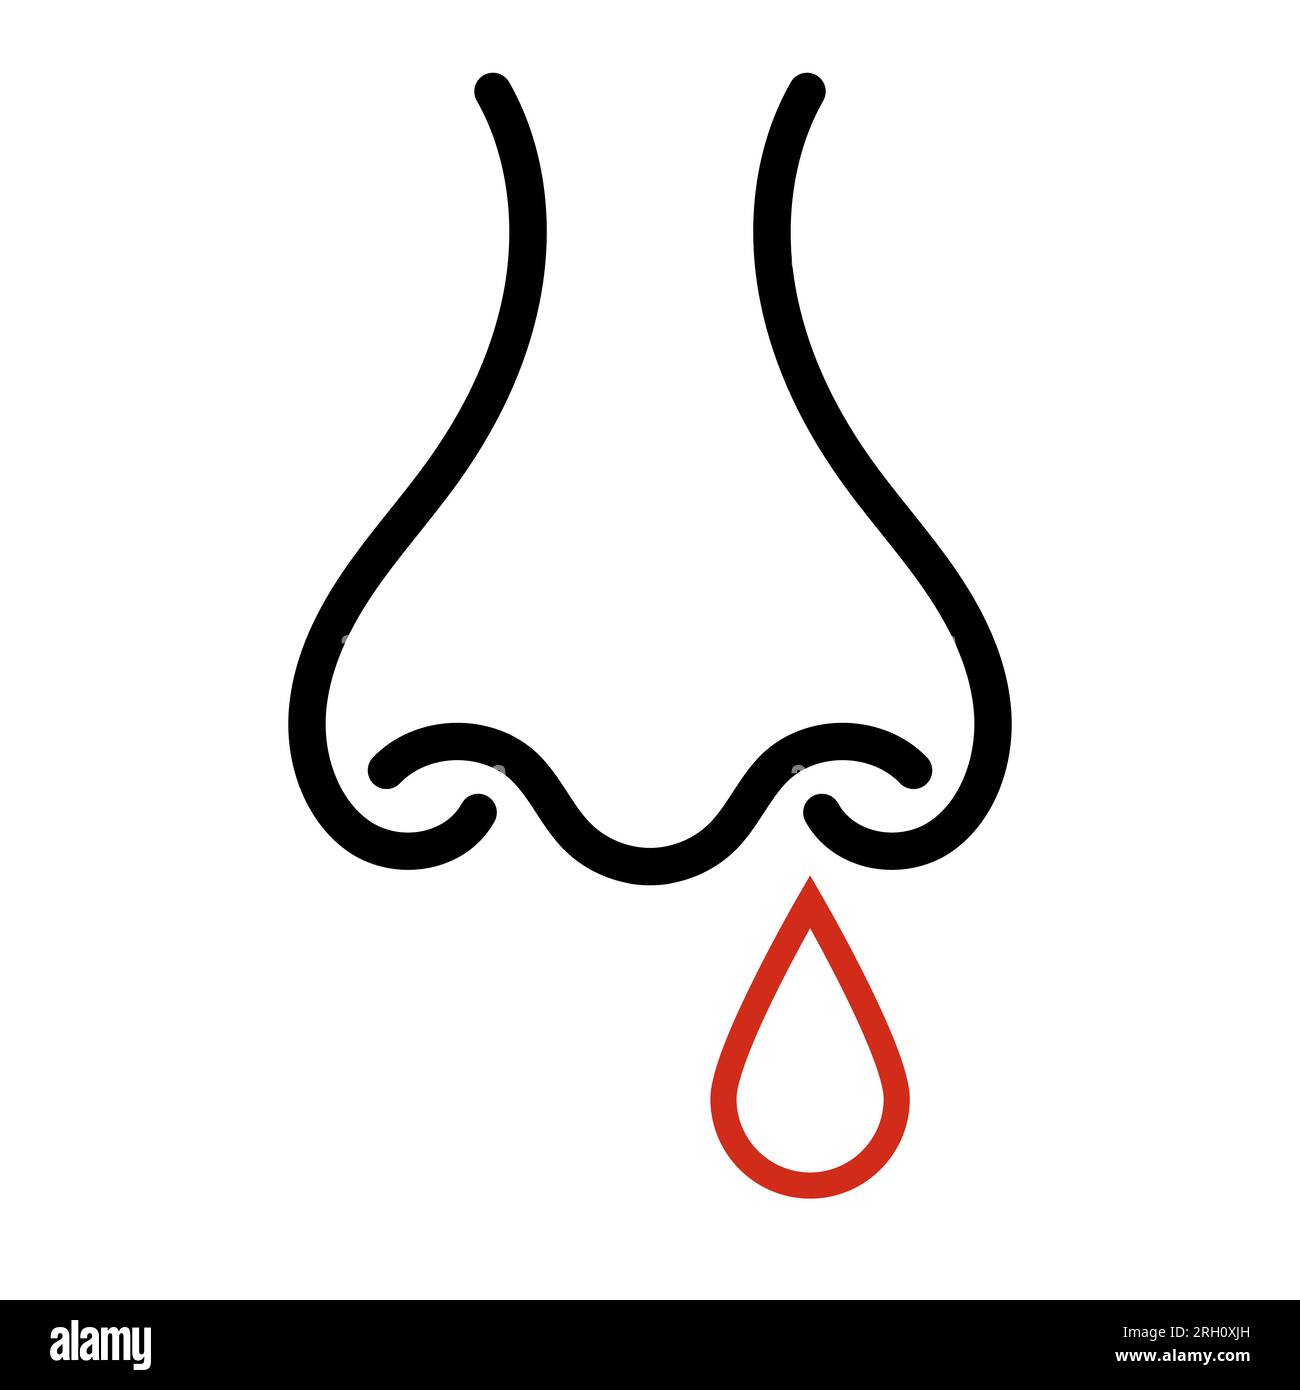 Bleeding from nose, nosebleed drops blood flow from nose Stock Vector